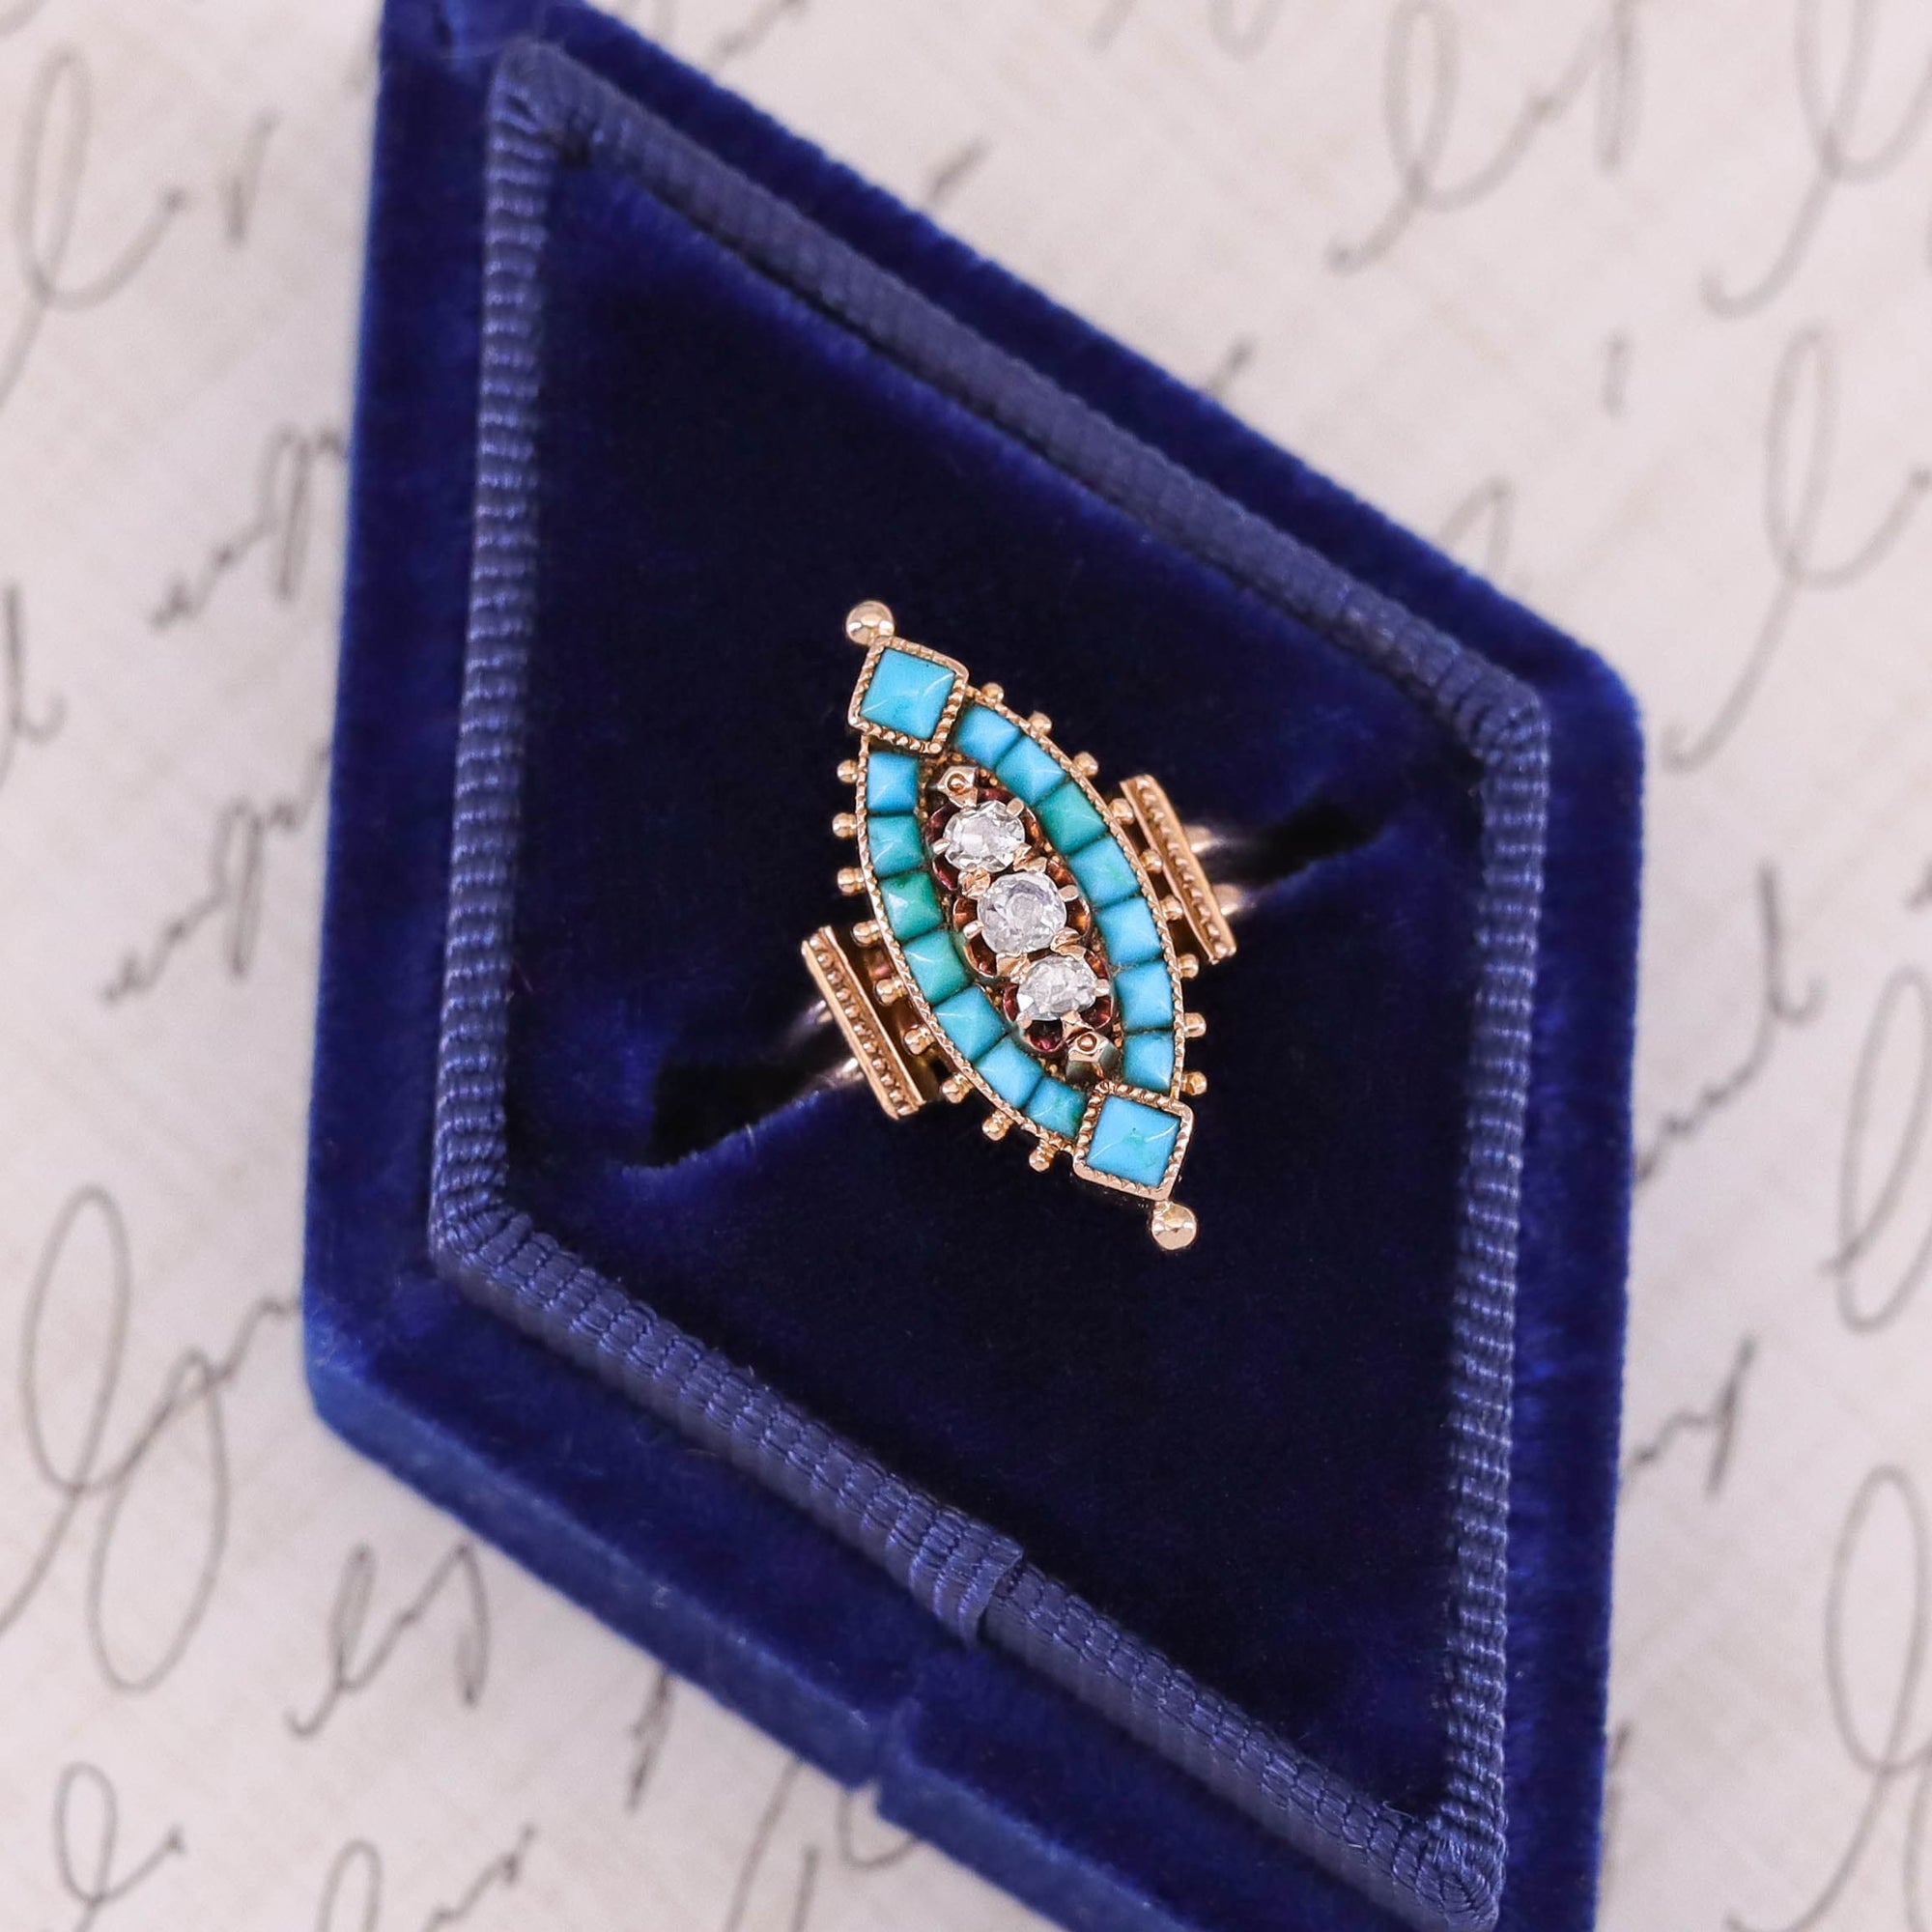 Antique Turquoise and Diamond Ring of 14k Gold